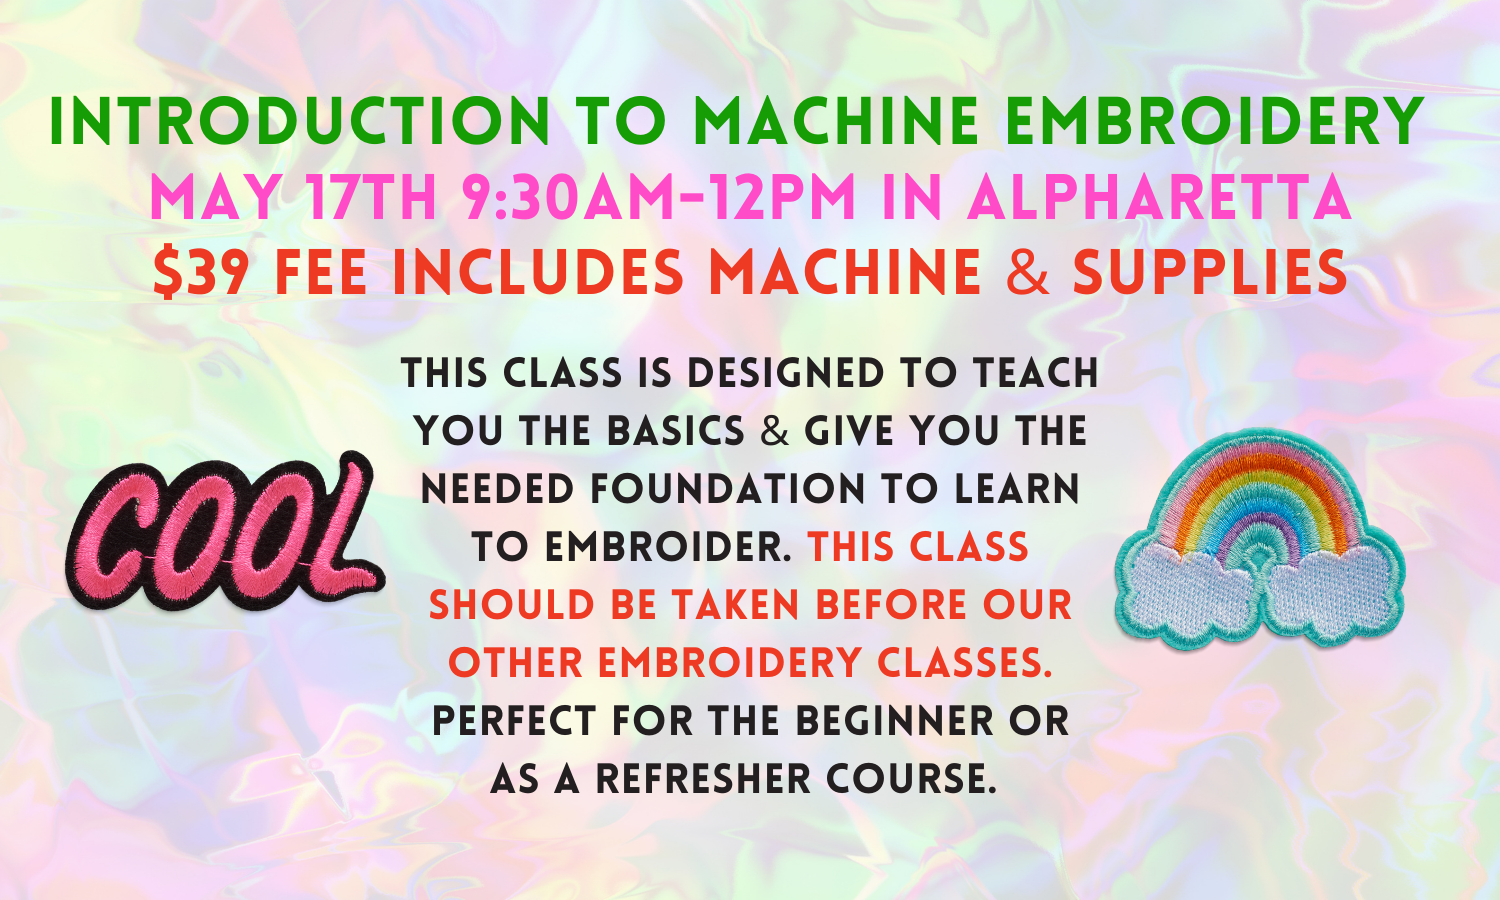 Introduction to Machine Embroidery 5/17